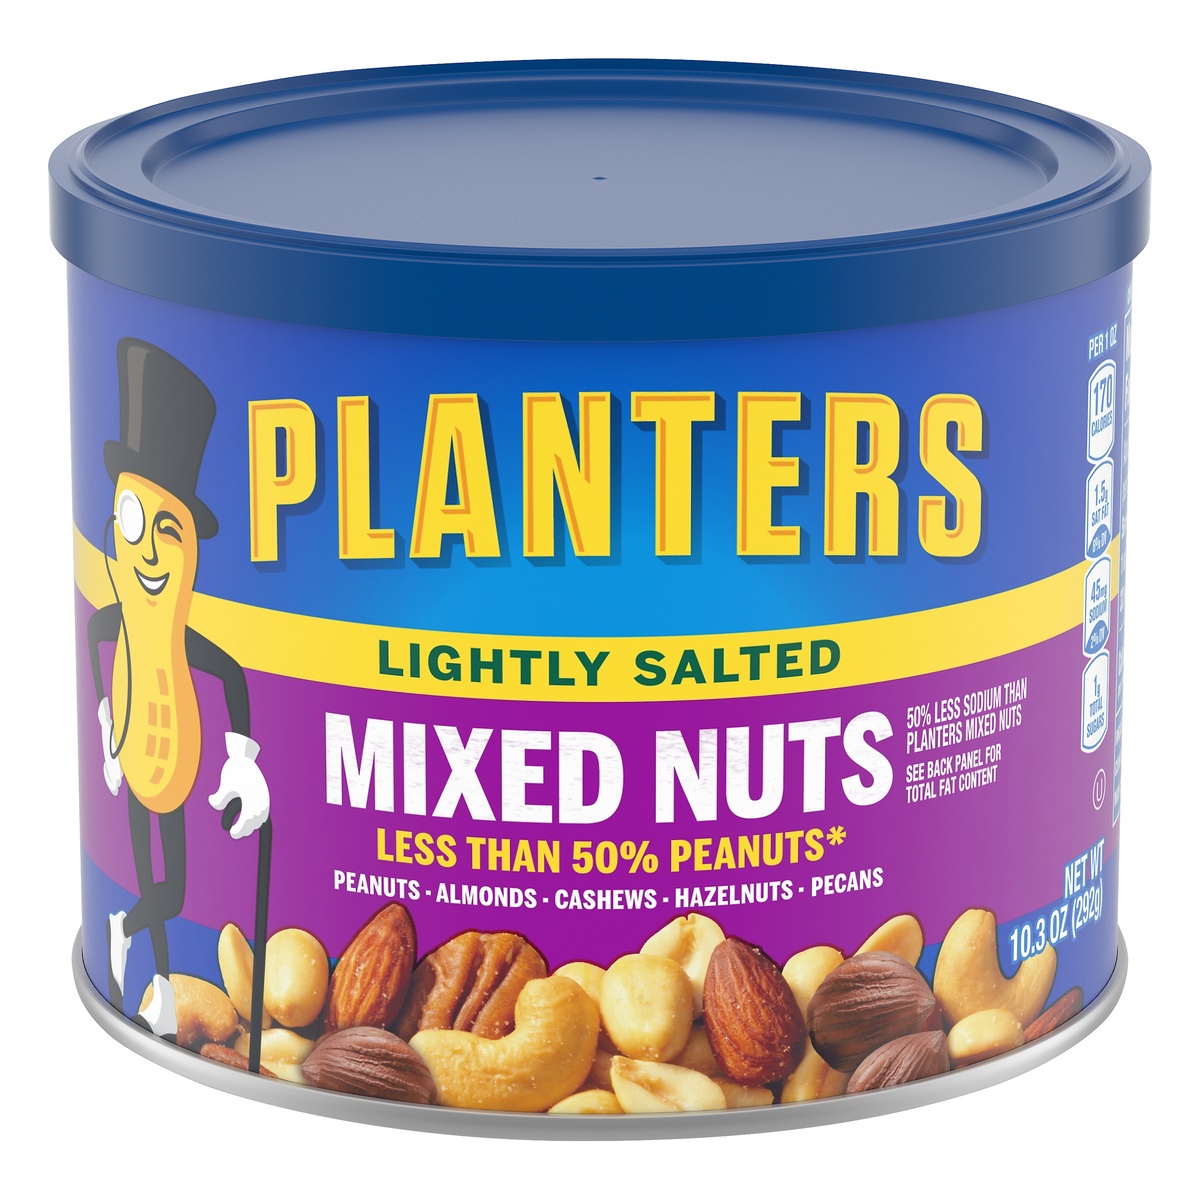 slide 11 of 11, Planters Lightly Salted Deluxe Mixed Nuts,Canister, 10.3 oz